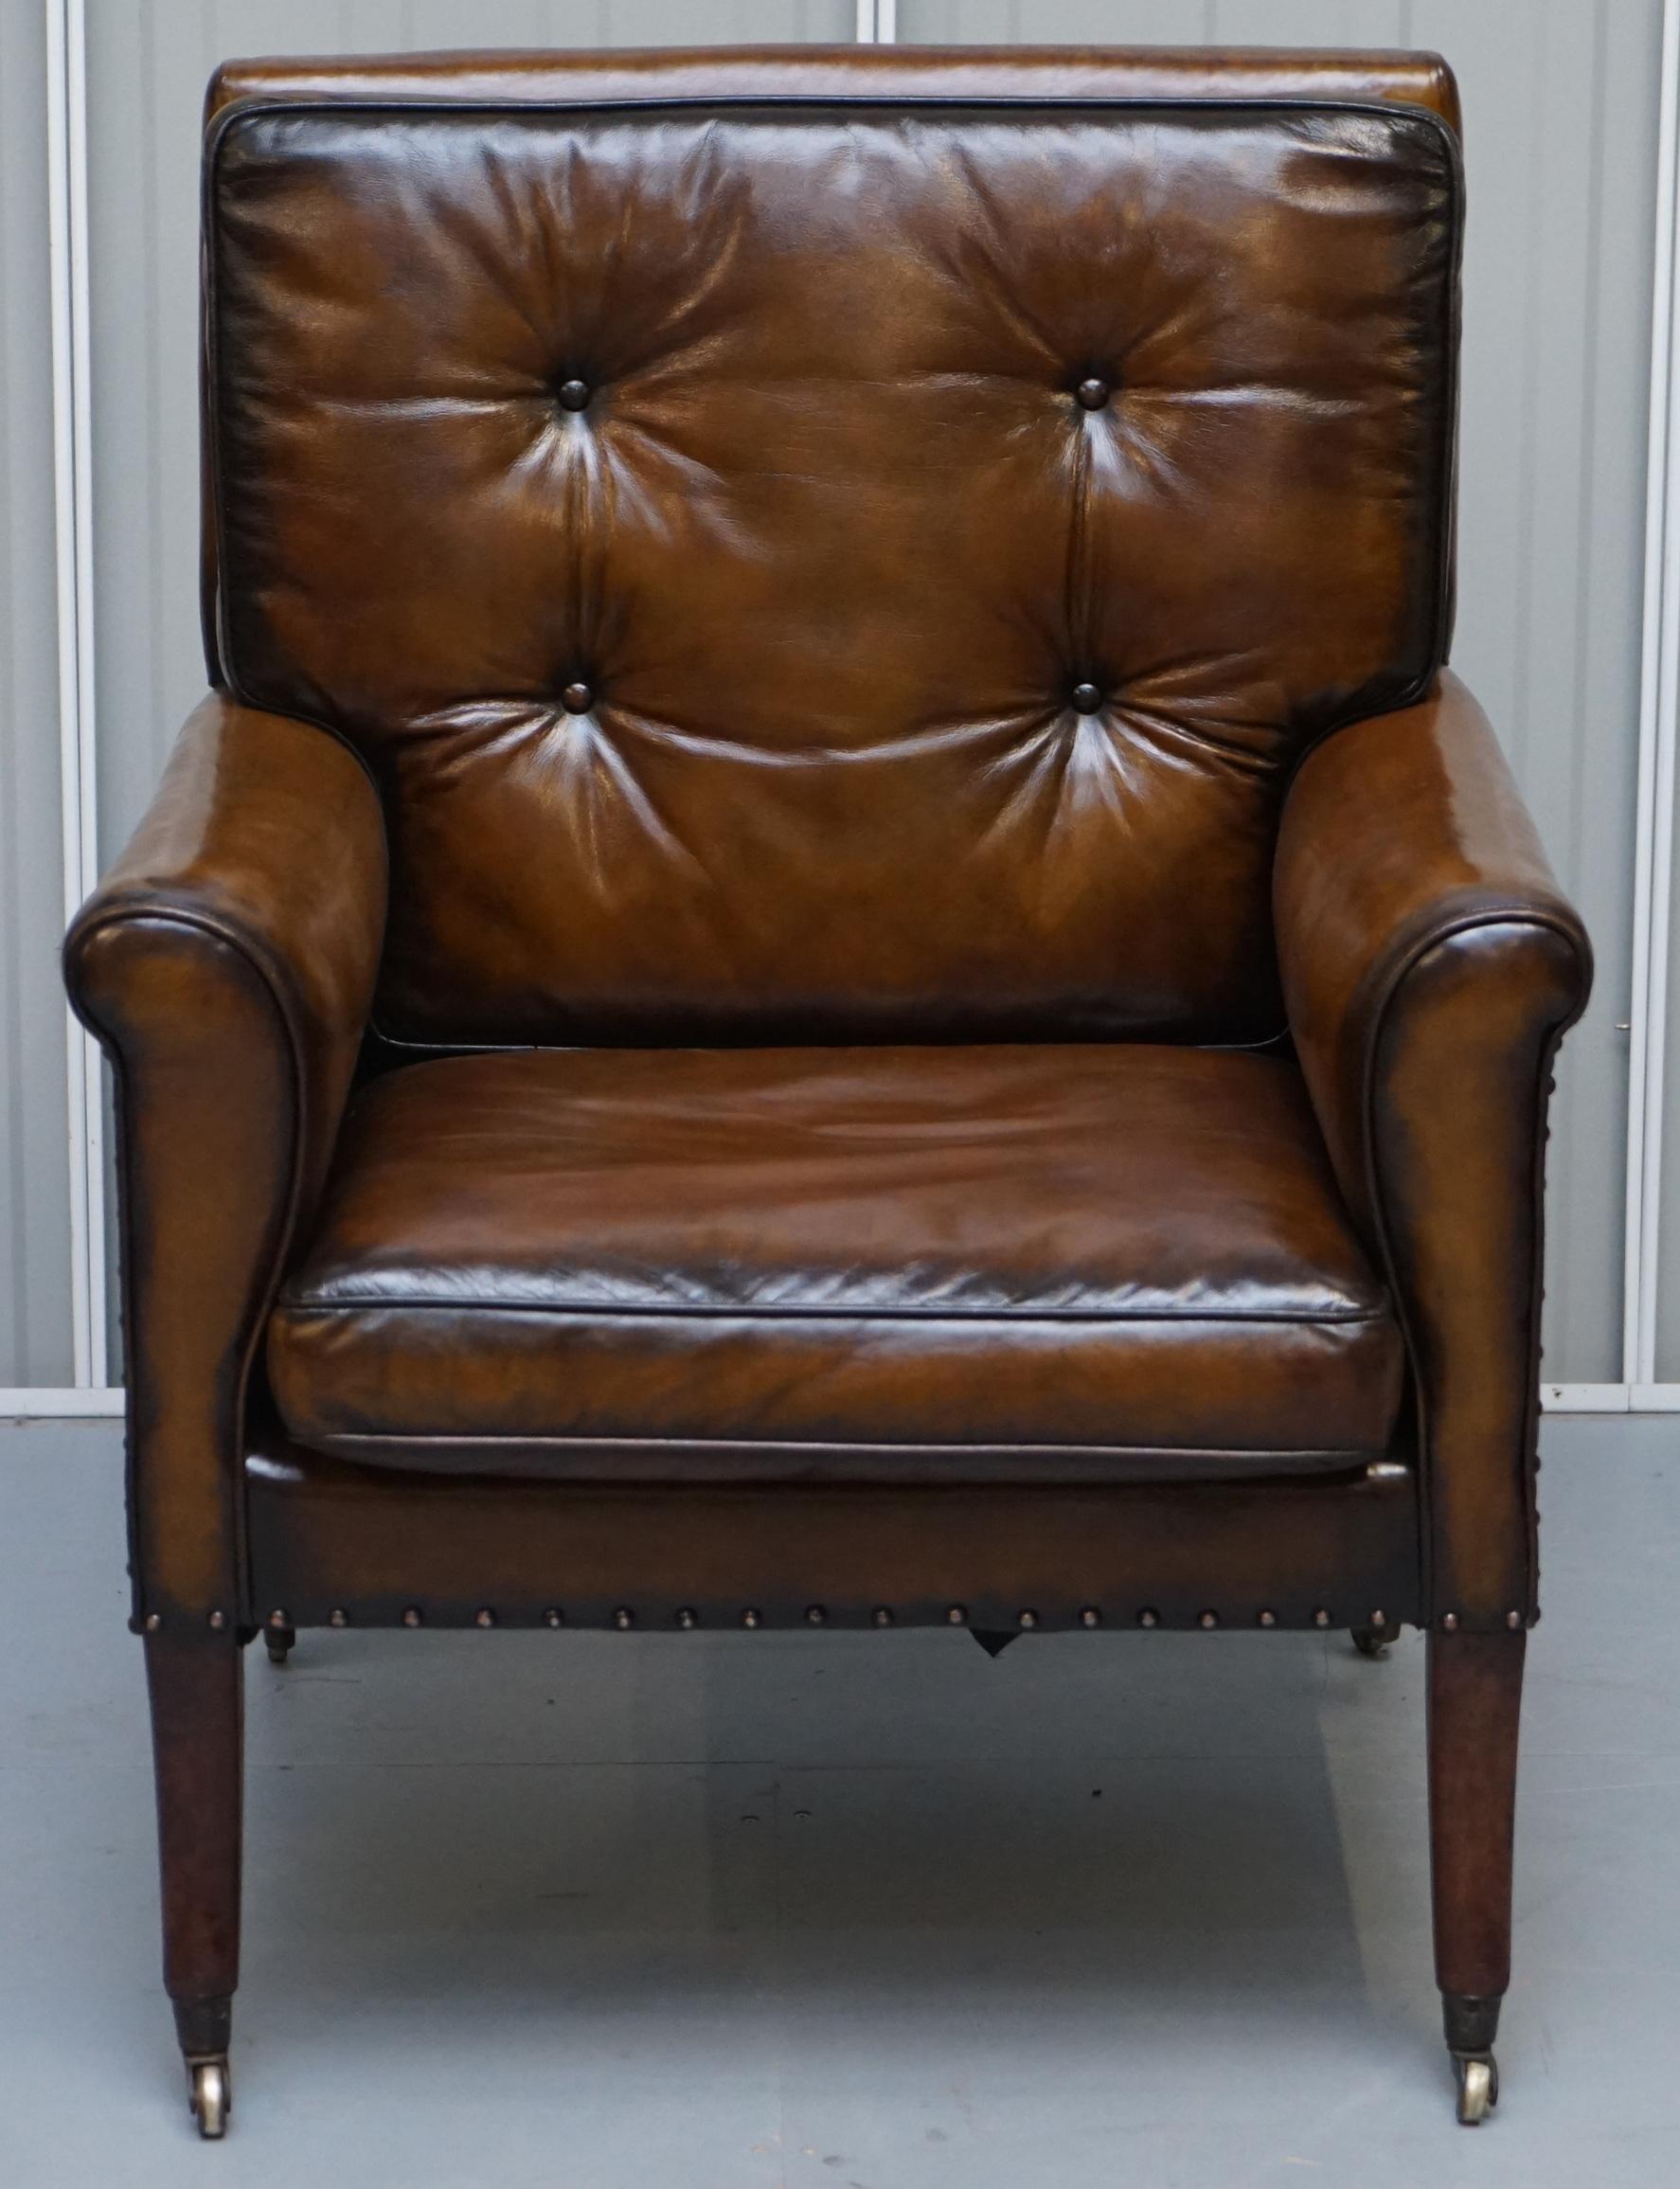 We are delighted to offer for sale this stunning fully restored Regency gentlemen's club brown leather armchair 

This is the only chair of its type I have ever seen, its original Regency as mentioned, the frame is solid mahogany and very ornately